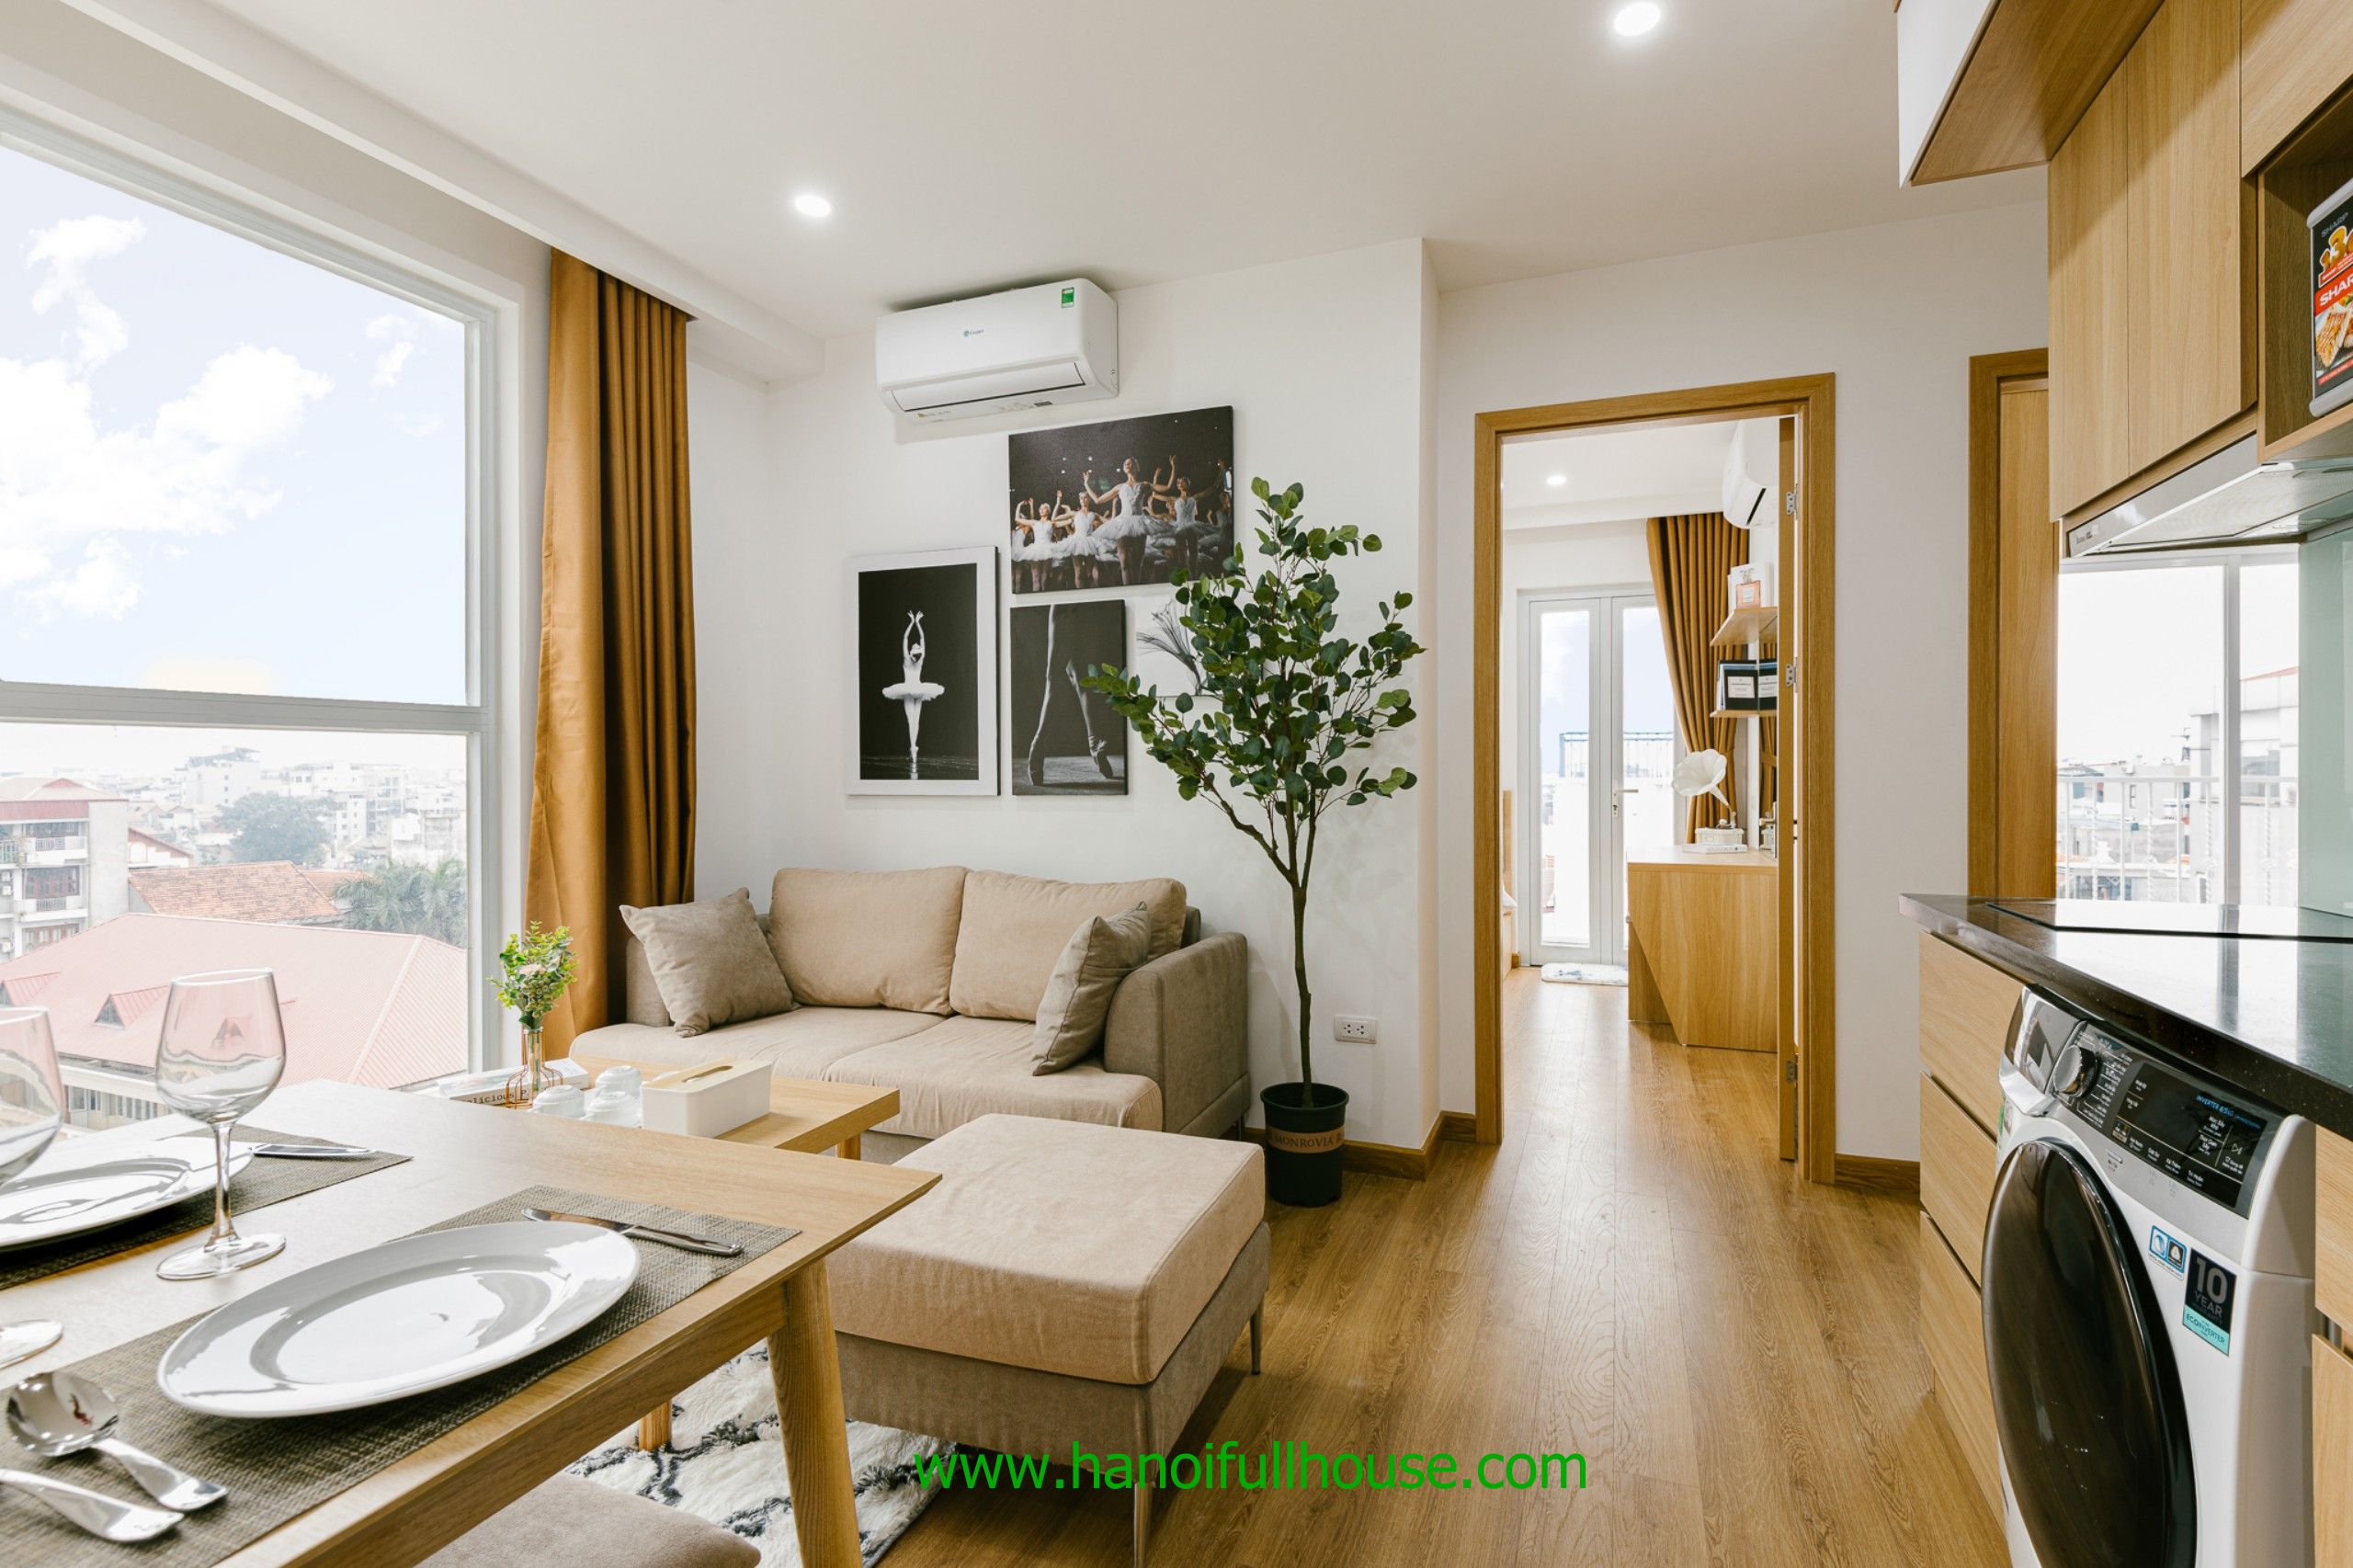 Brand new and modern apartment with 2 bedrooms in Tay Ho dist